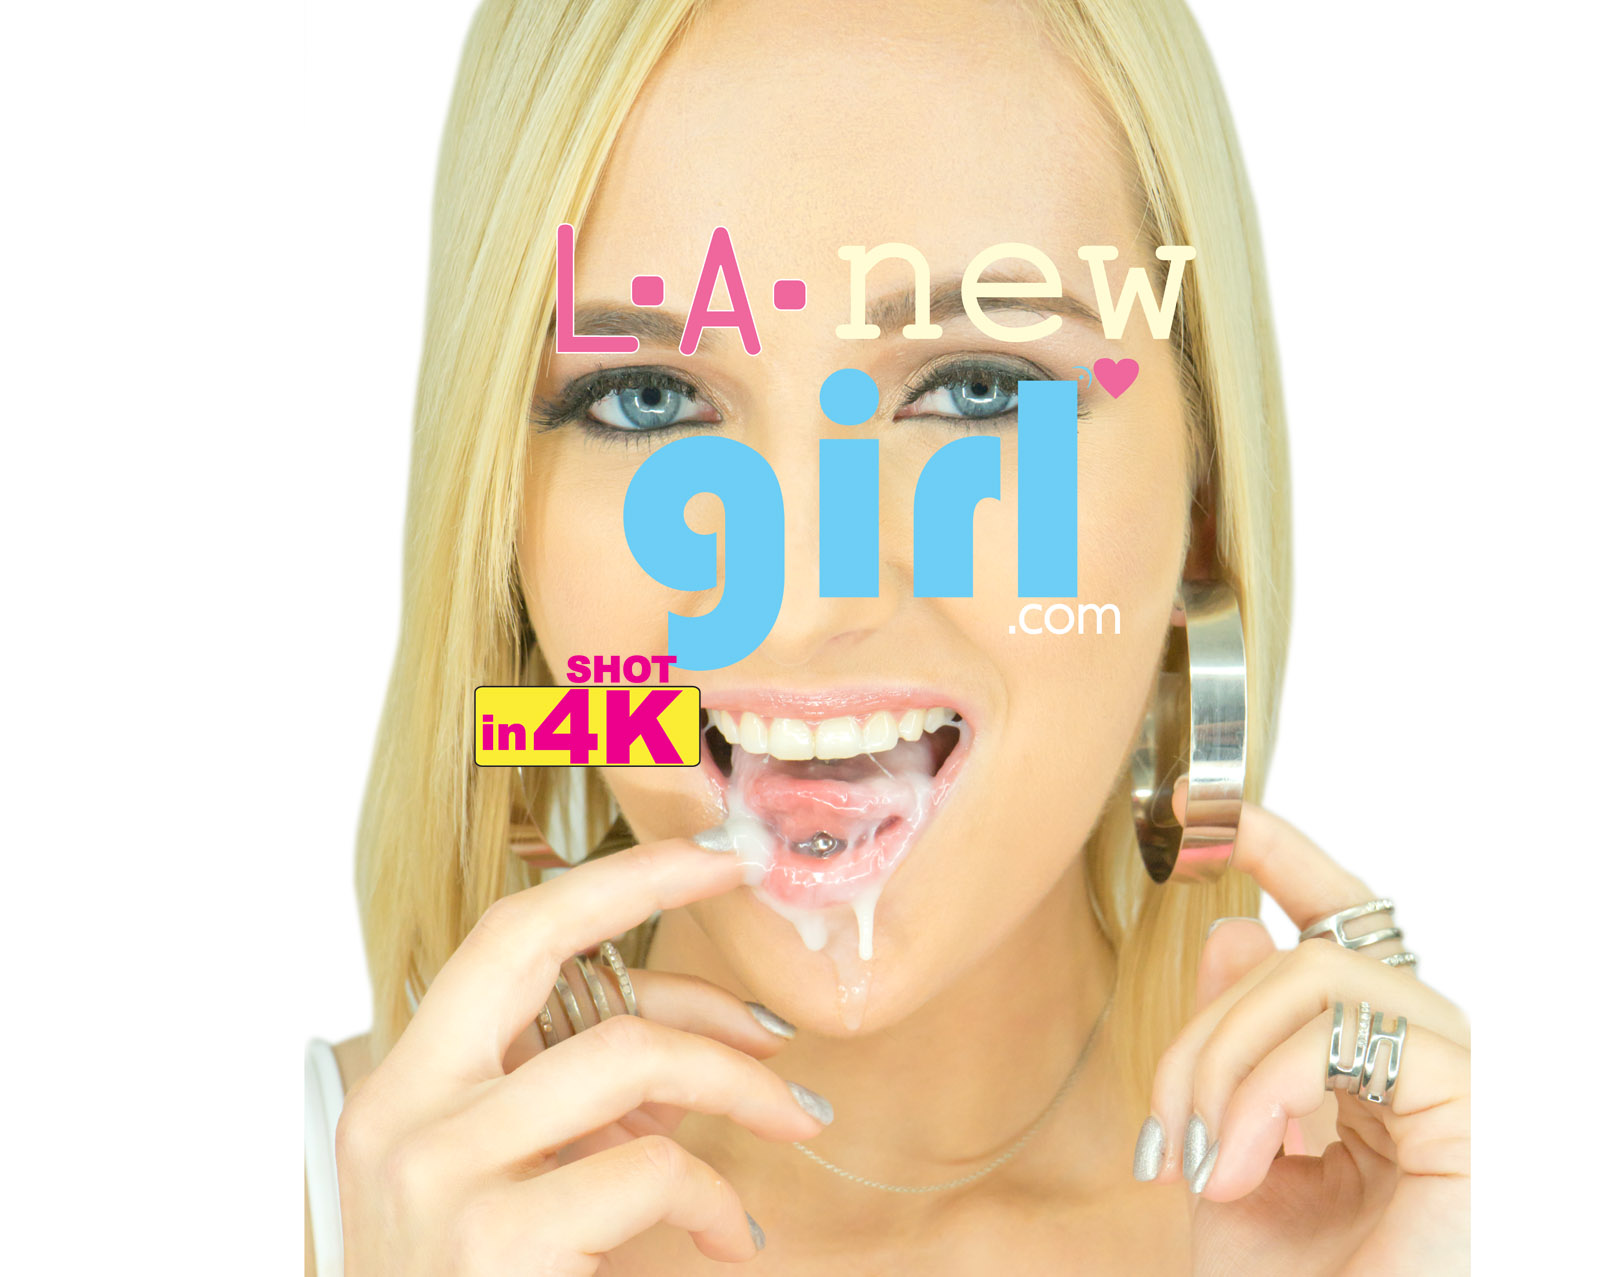 L.A. NEW GIRL . COM | OFFICIAL SITE | New Girls doing Porn.